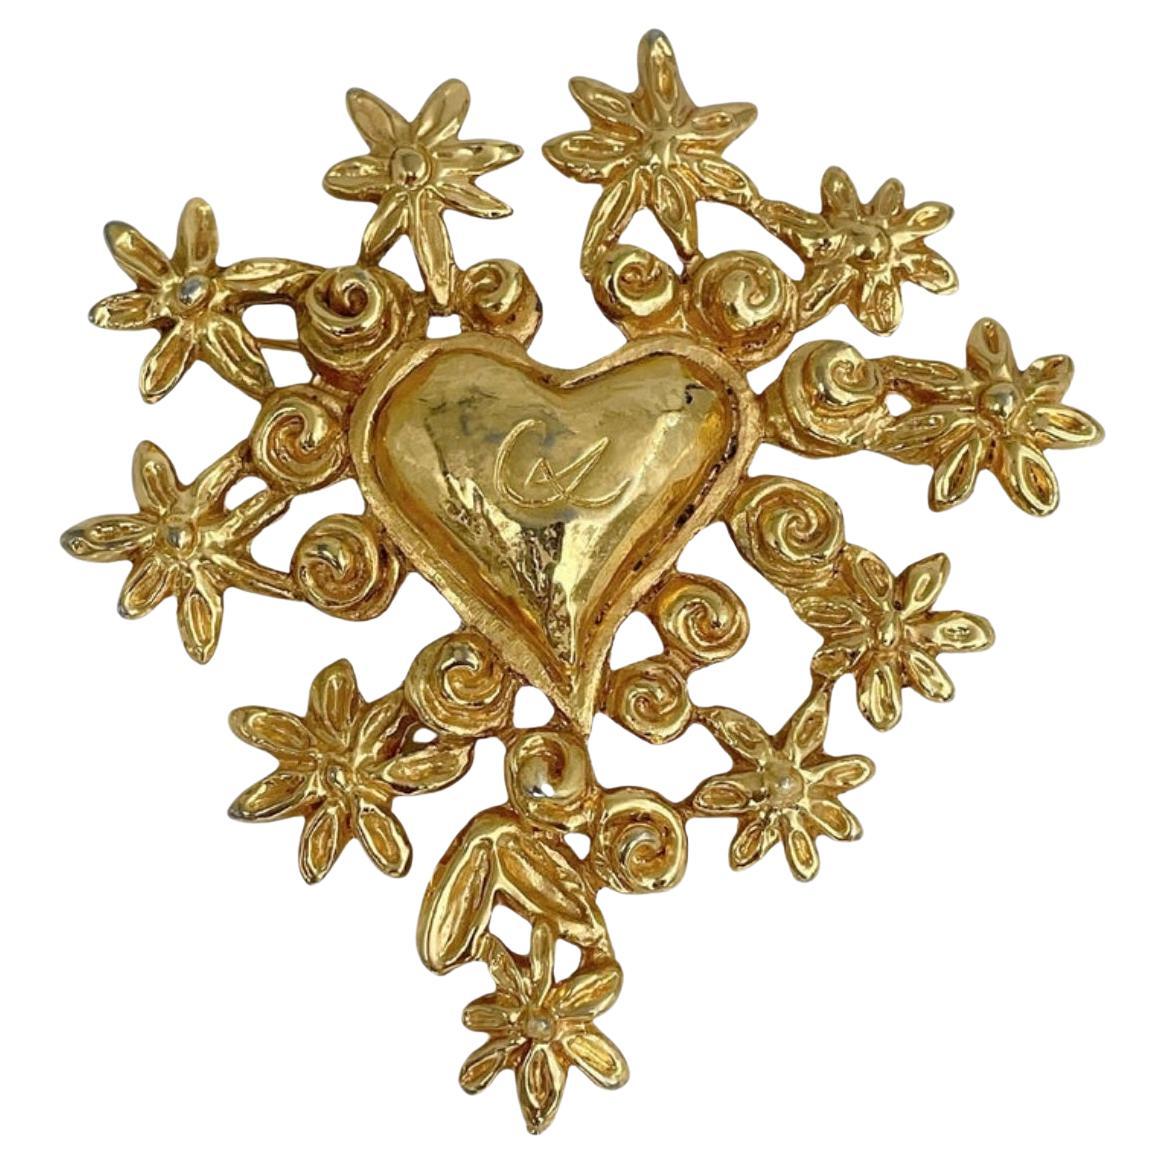 Rare CHRISTIAN LACROIX, vintage brooch "Noel 93" heart-shaped with logo For Sale